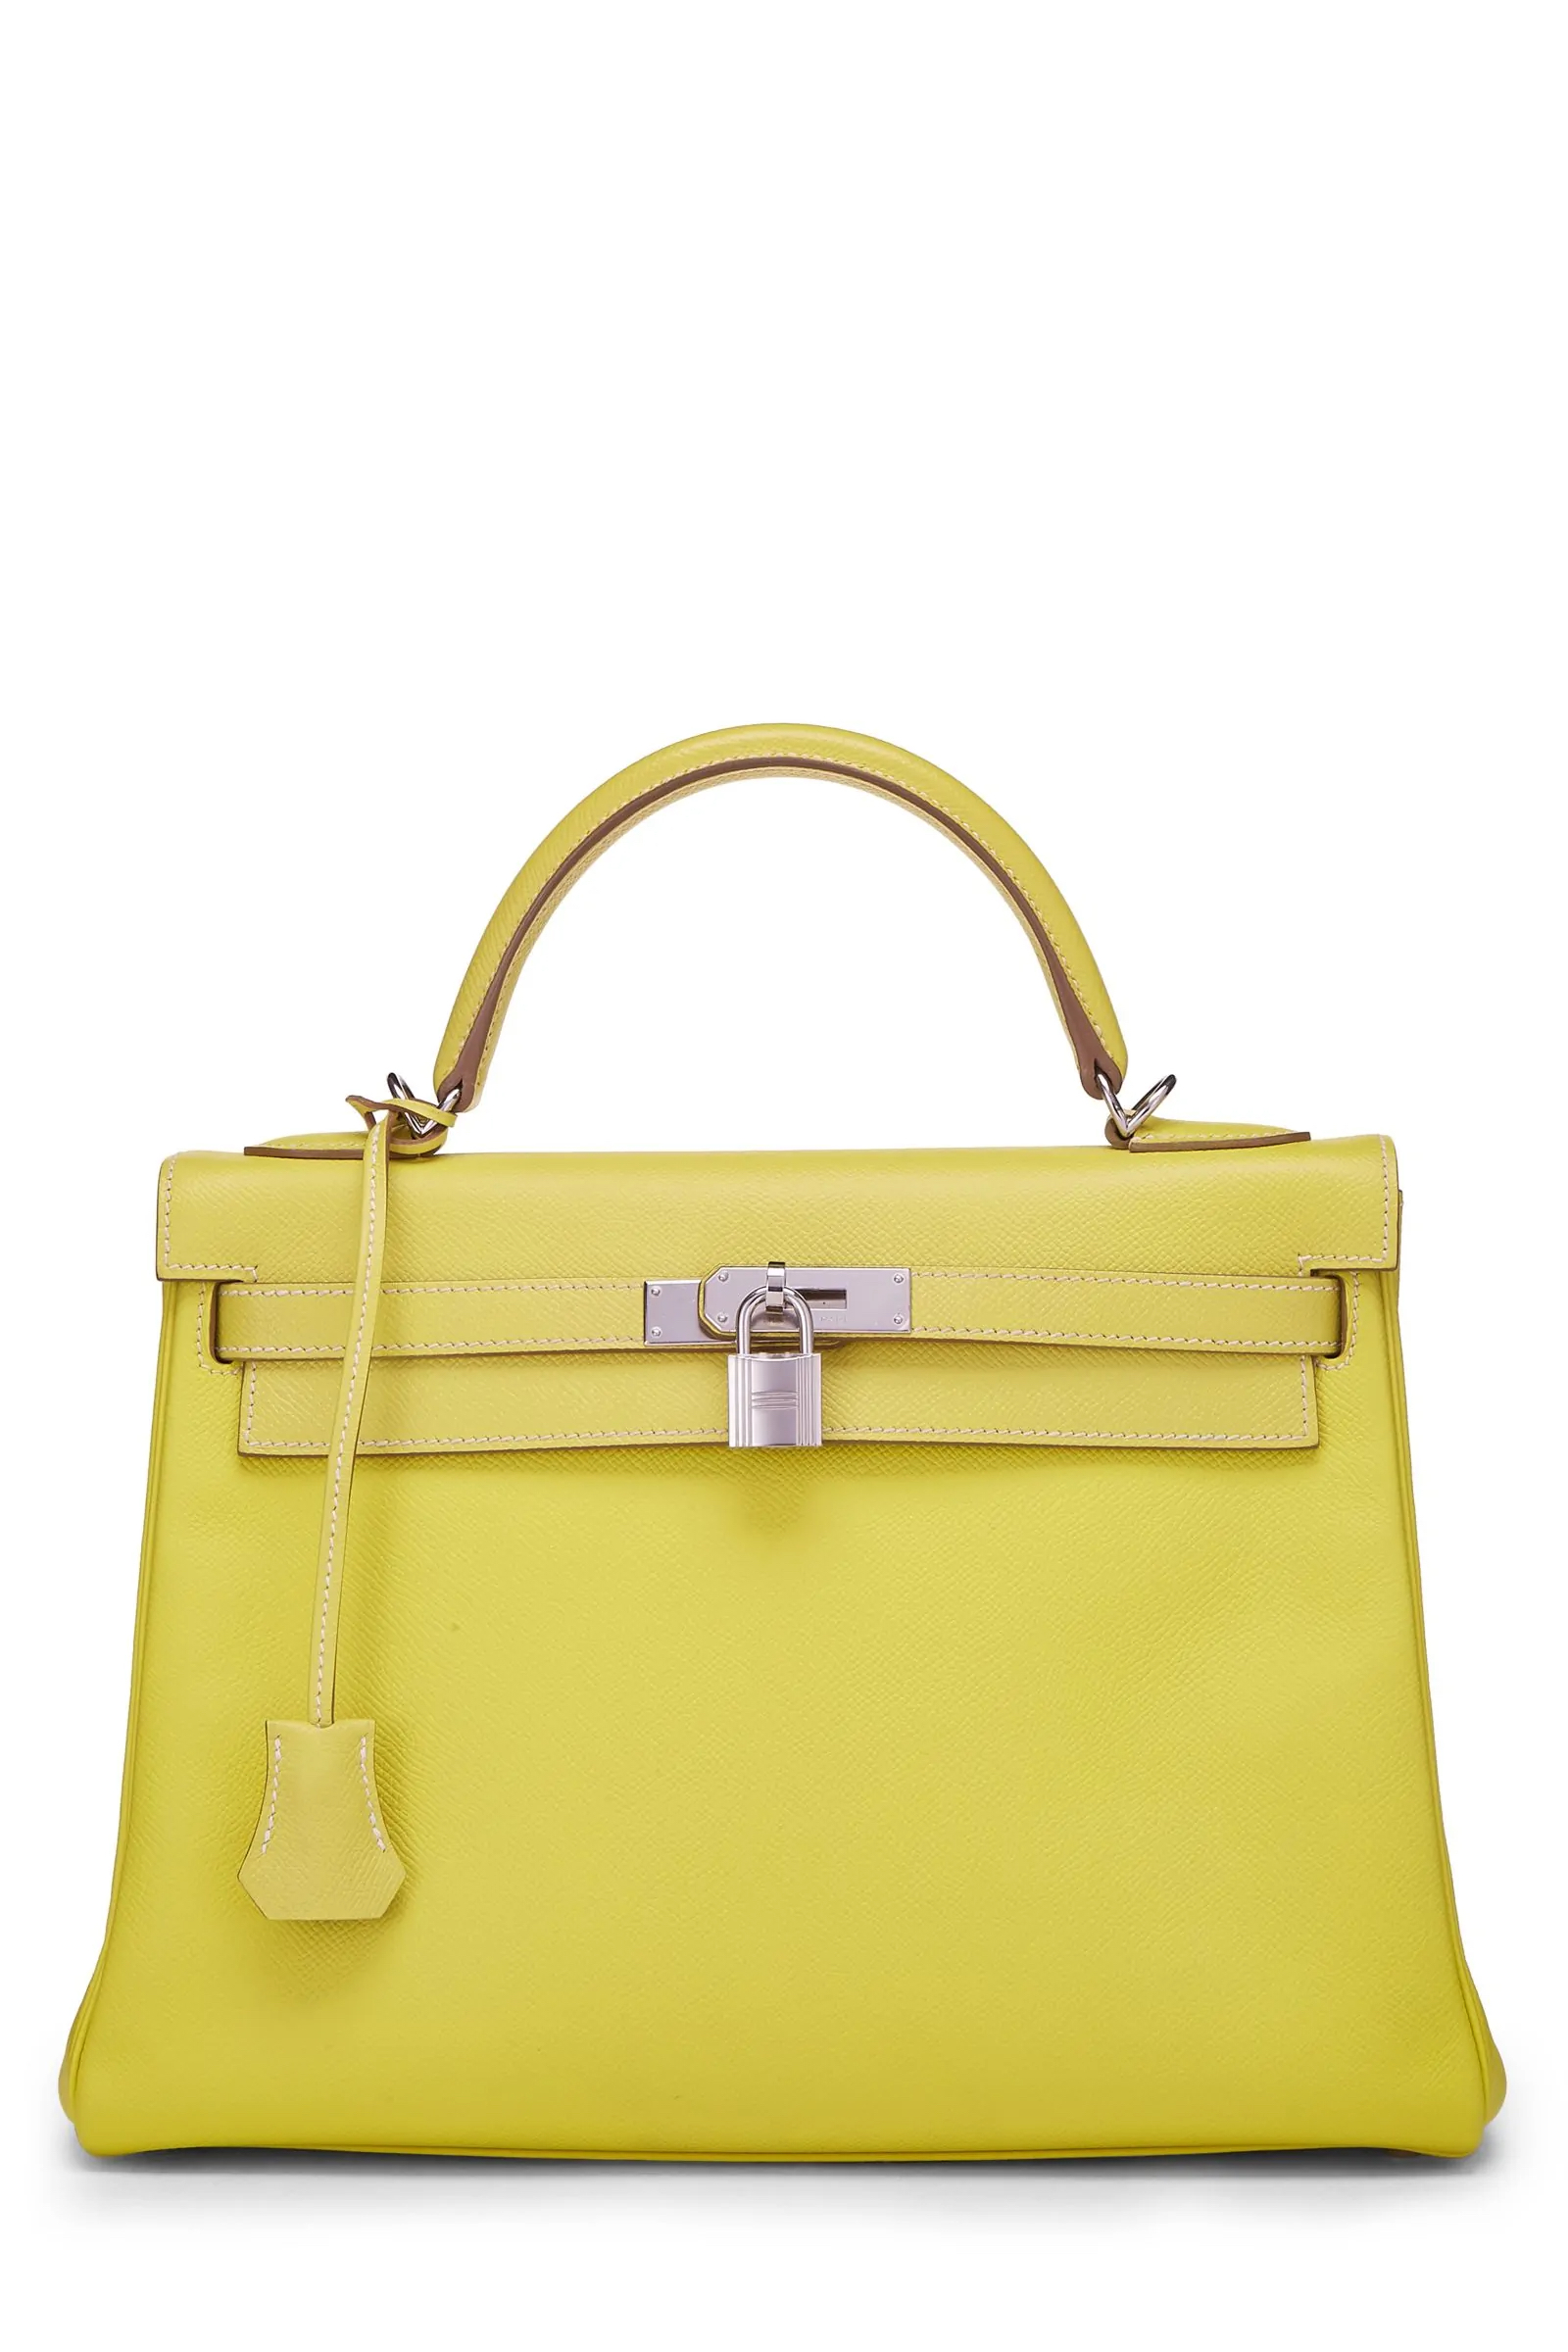 Is an Hermes Kelly or Birkin the Best Style for Me? - The Vintage Contessa  & Times Past